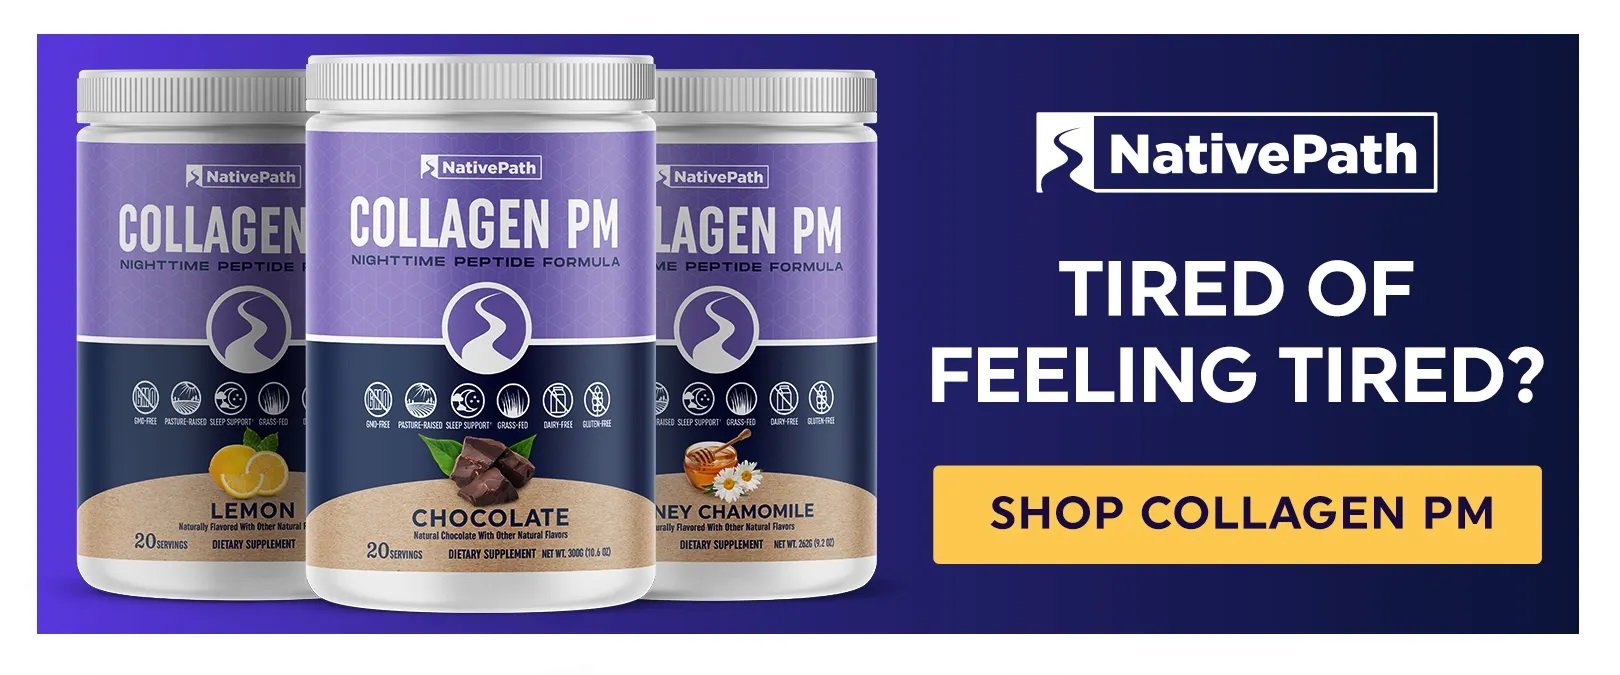 Tired of Feeling Tired? Shop Collagen PM